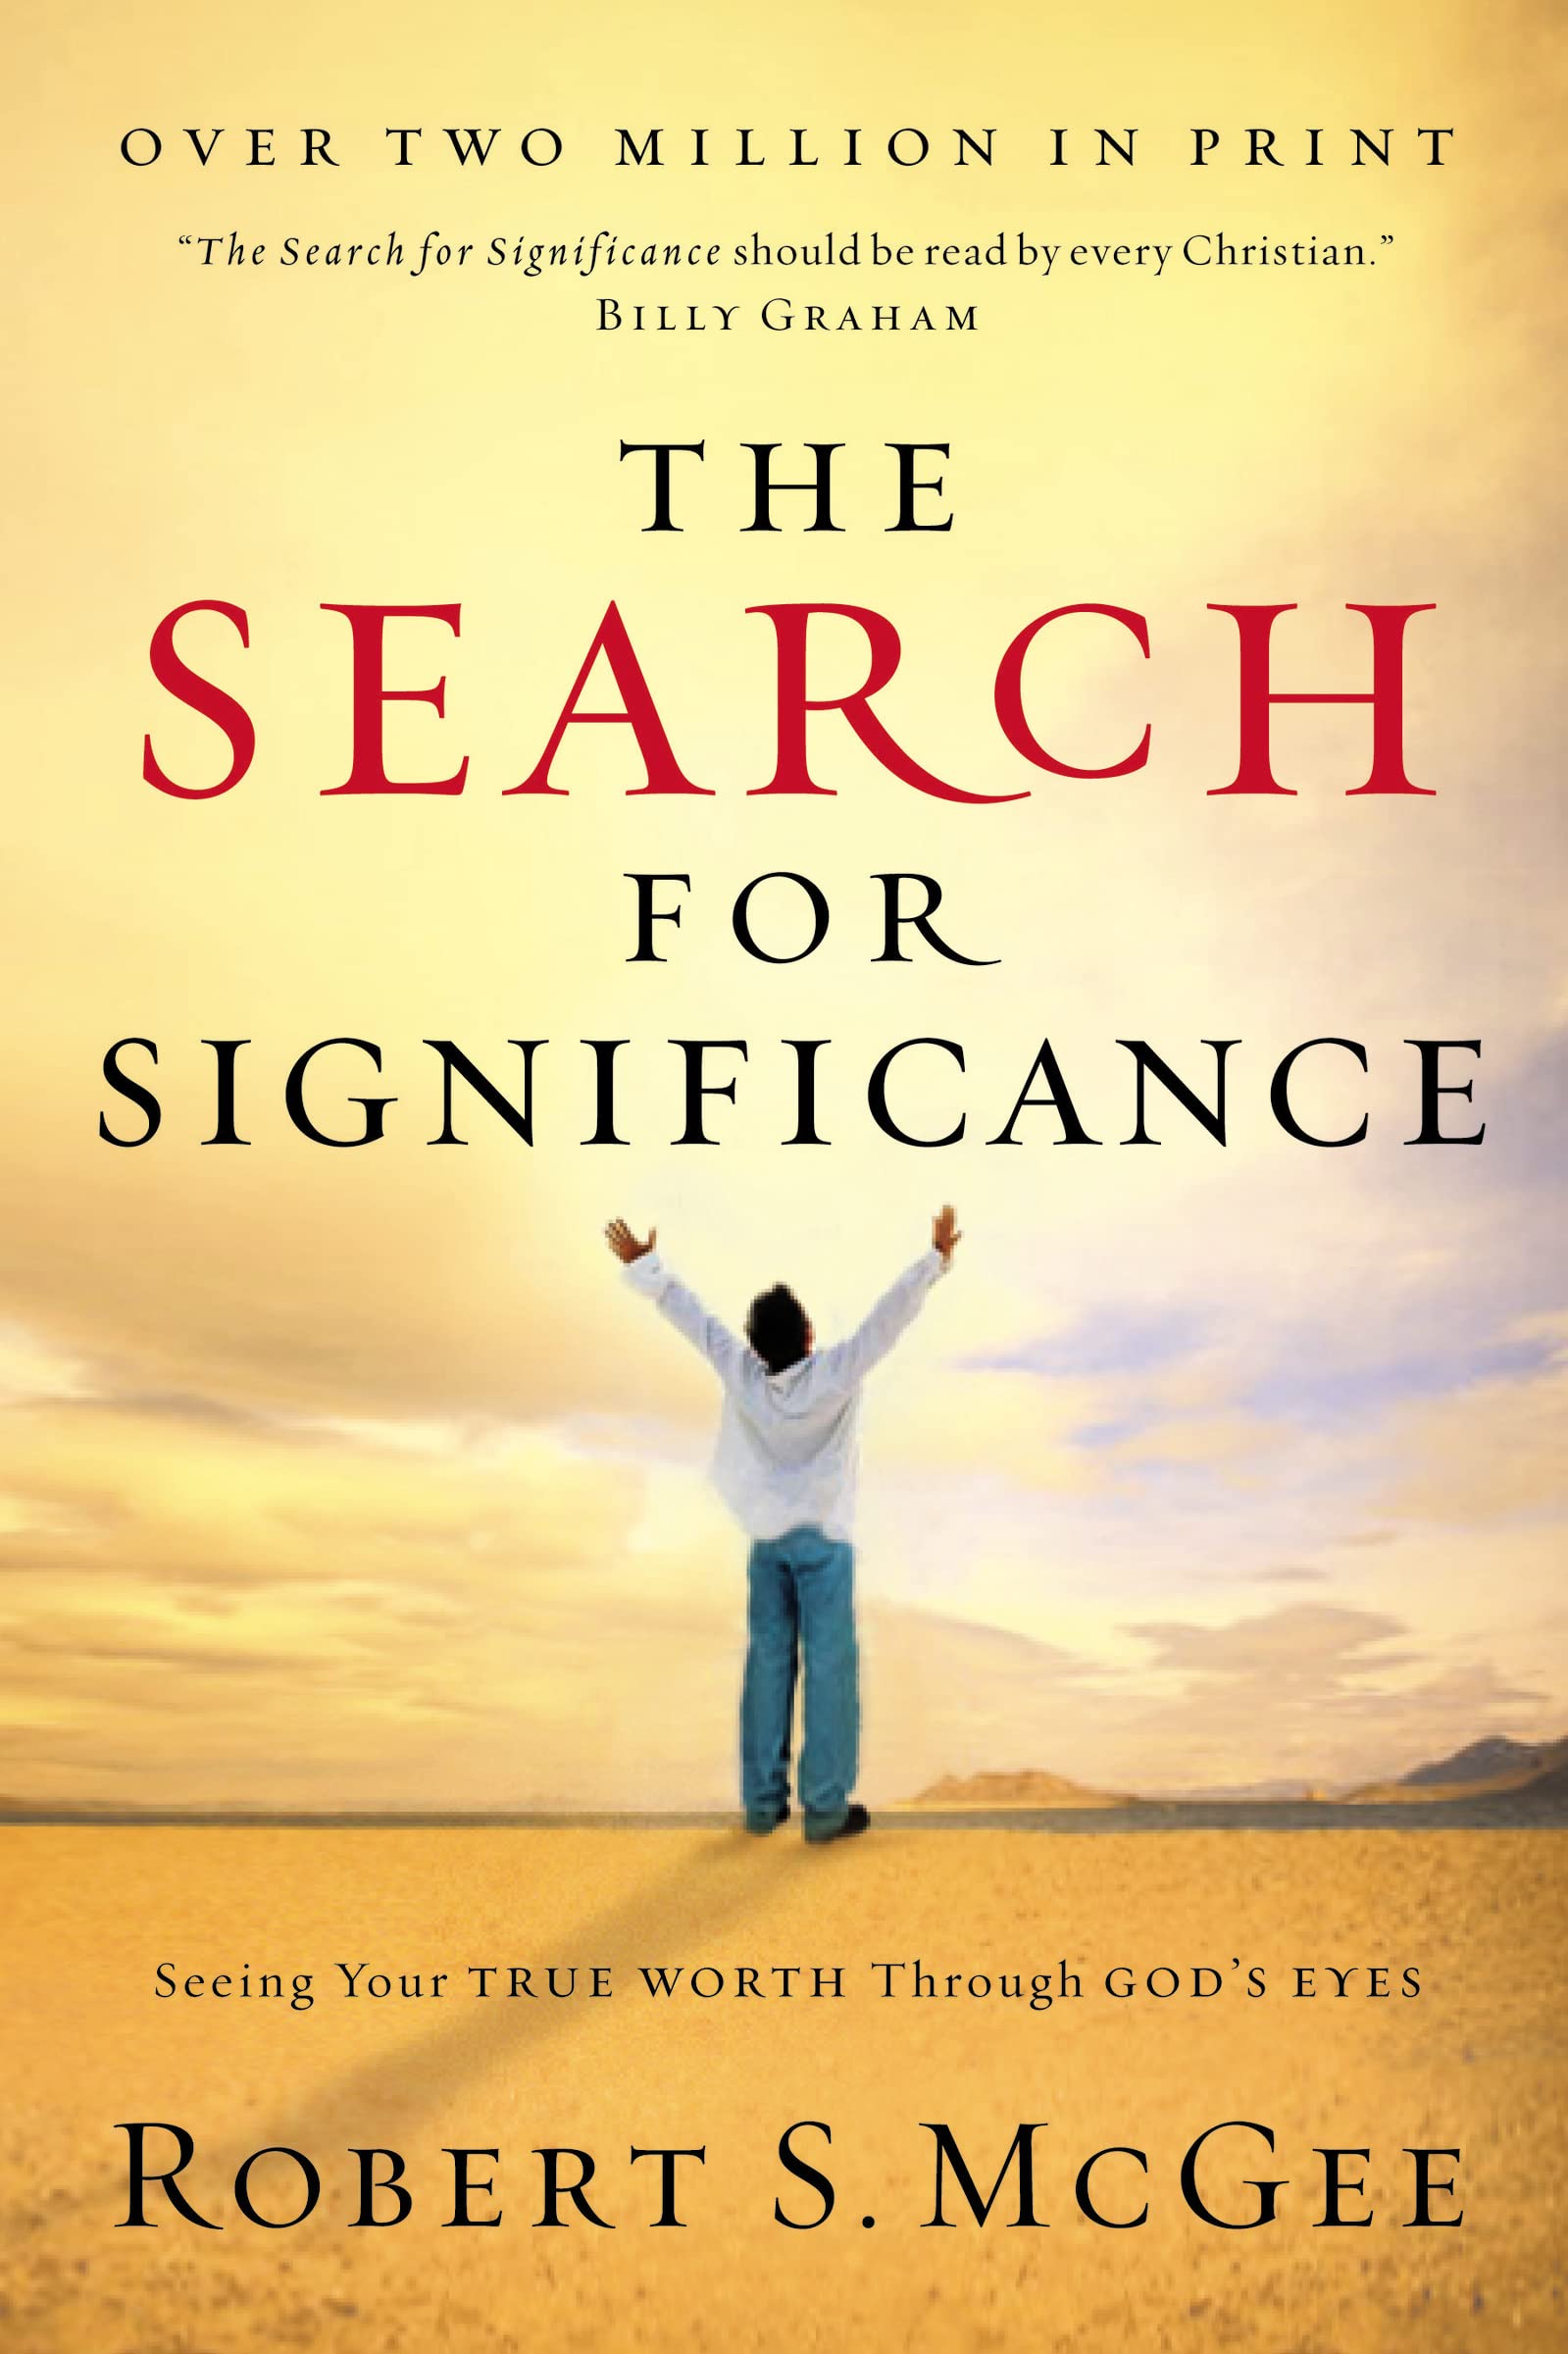 The Search for Significance: Seeing Your True Worth Through God's Eyes (Revised) - SureShot Books Publishing LLC